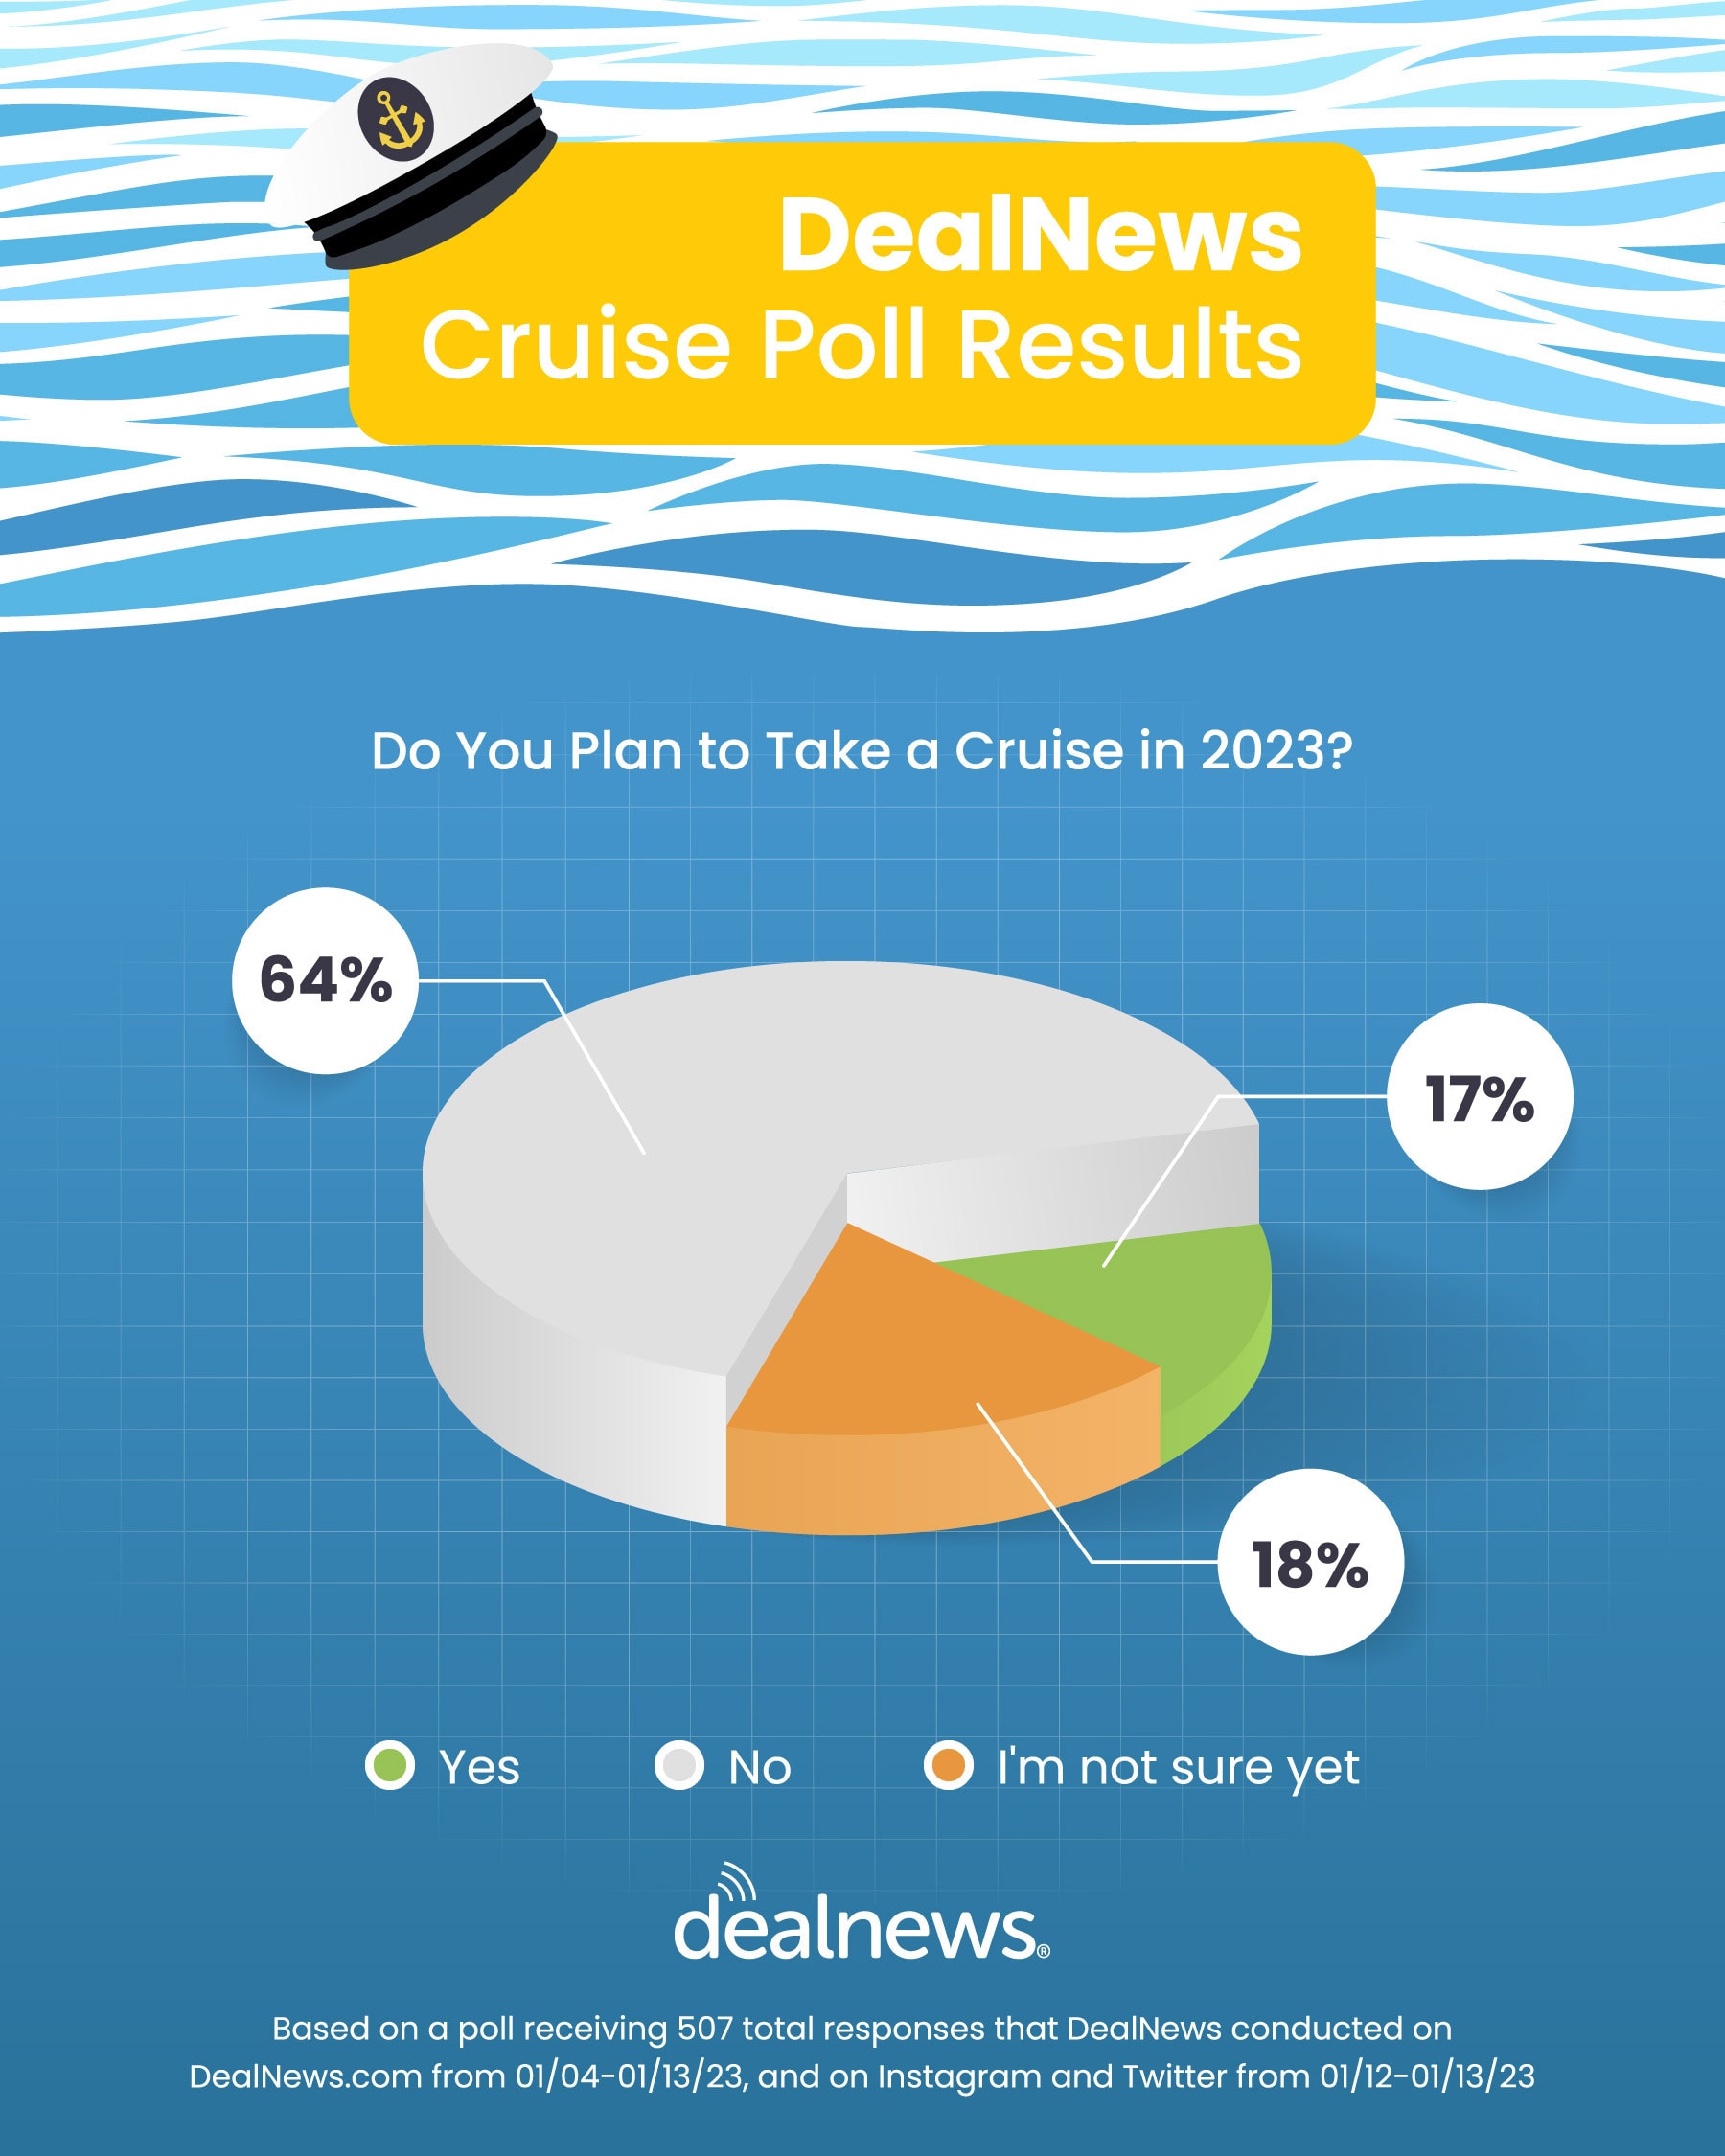 DealNews cruise poll results shown in pie chart form.